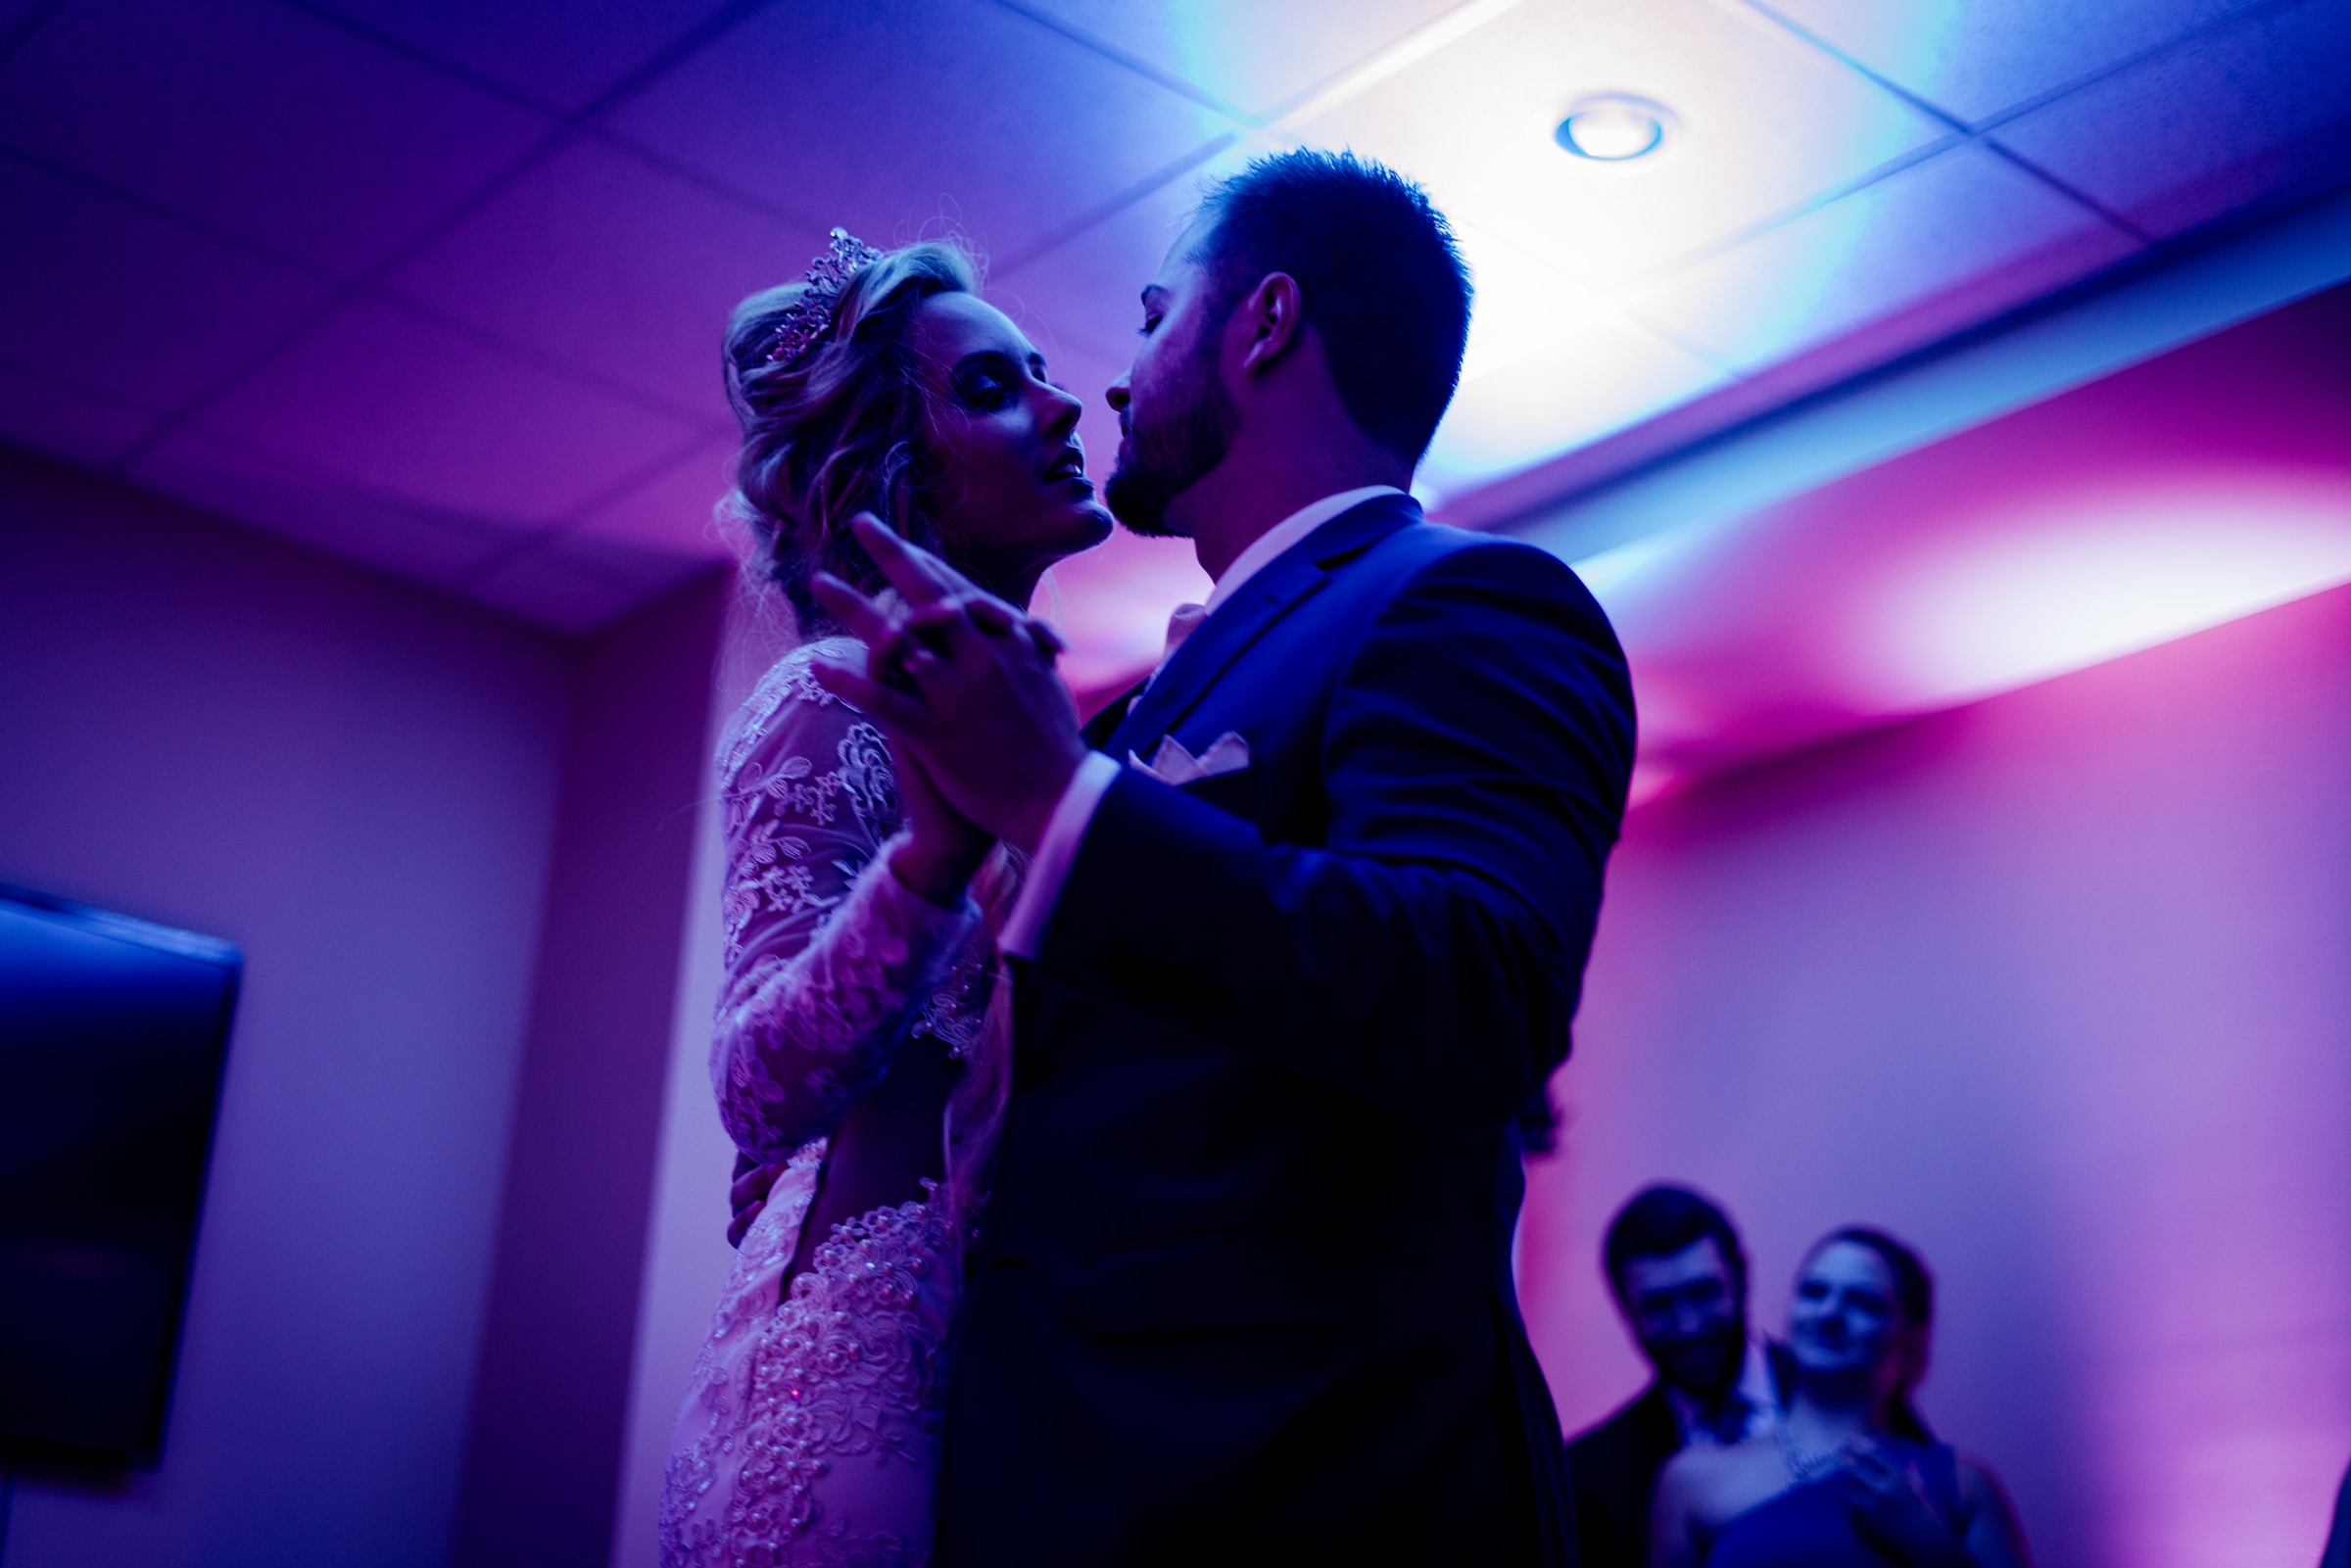 Newly married couple dancing. | Source: Unsplash